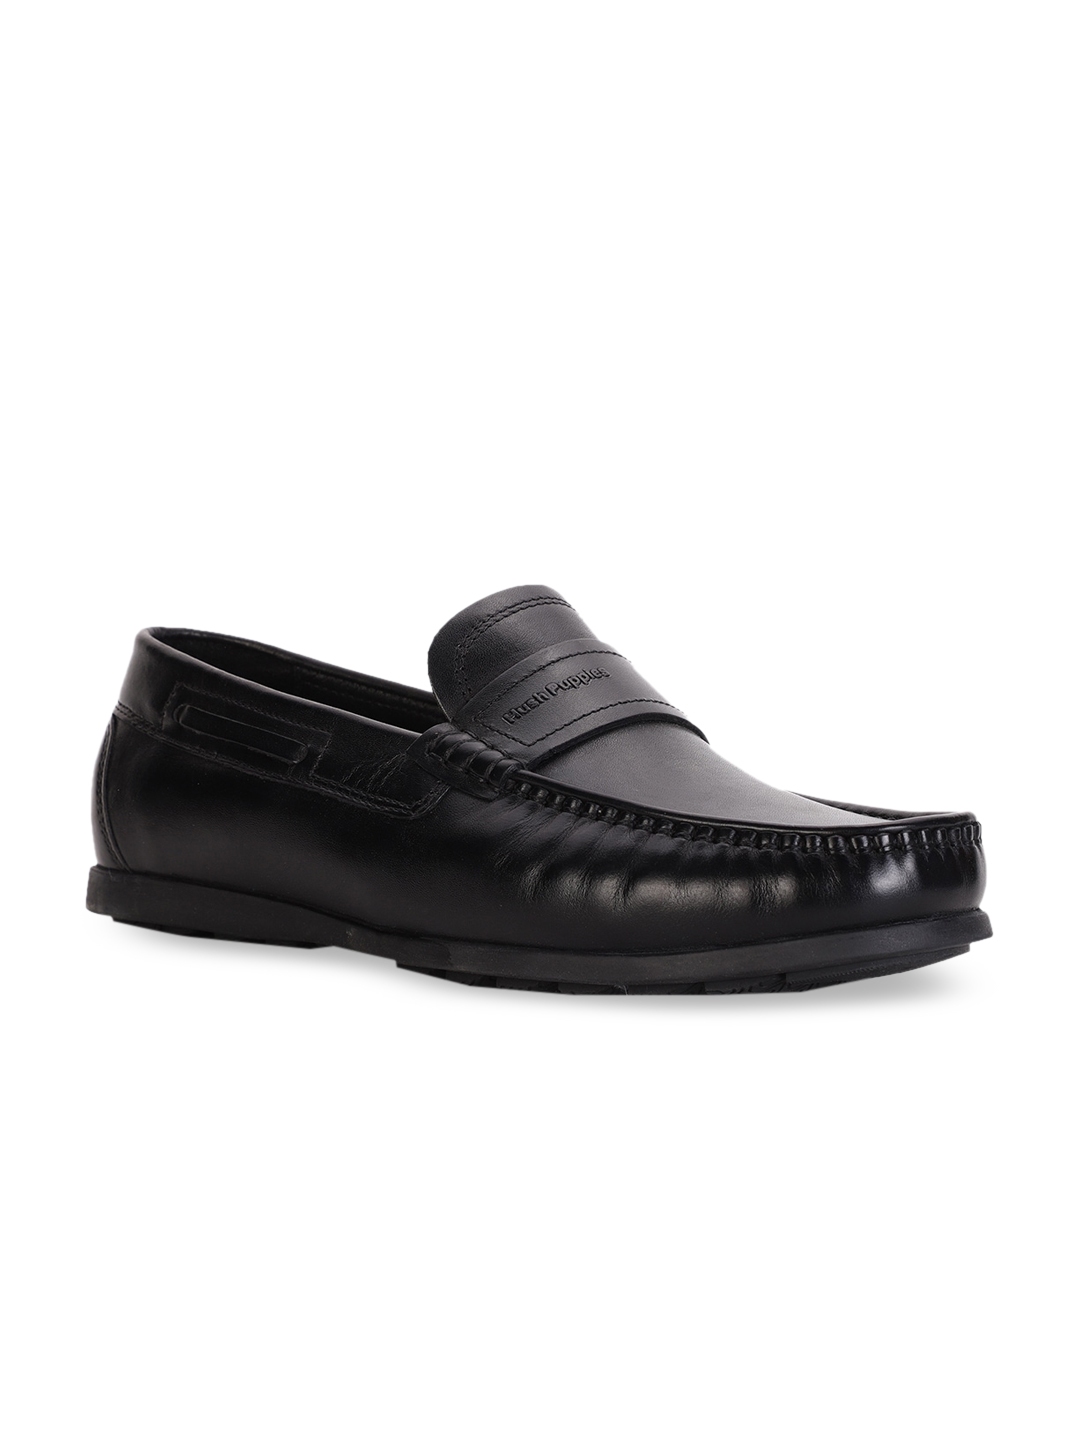 Buy Hush Puppies Men Black Solid Leather Formal Loafers - Formal Shoes ...